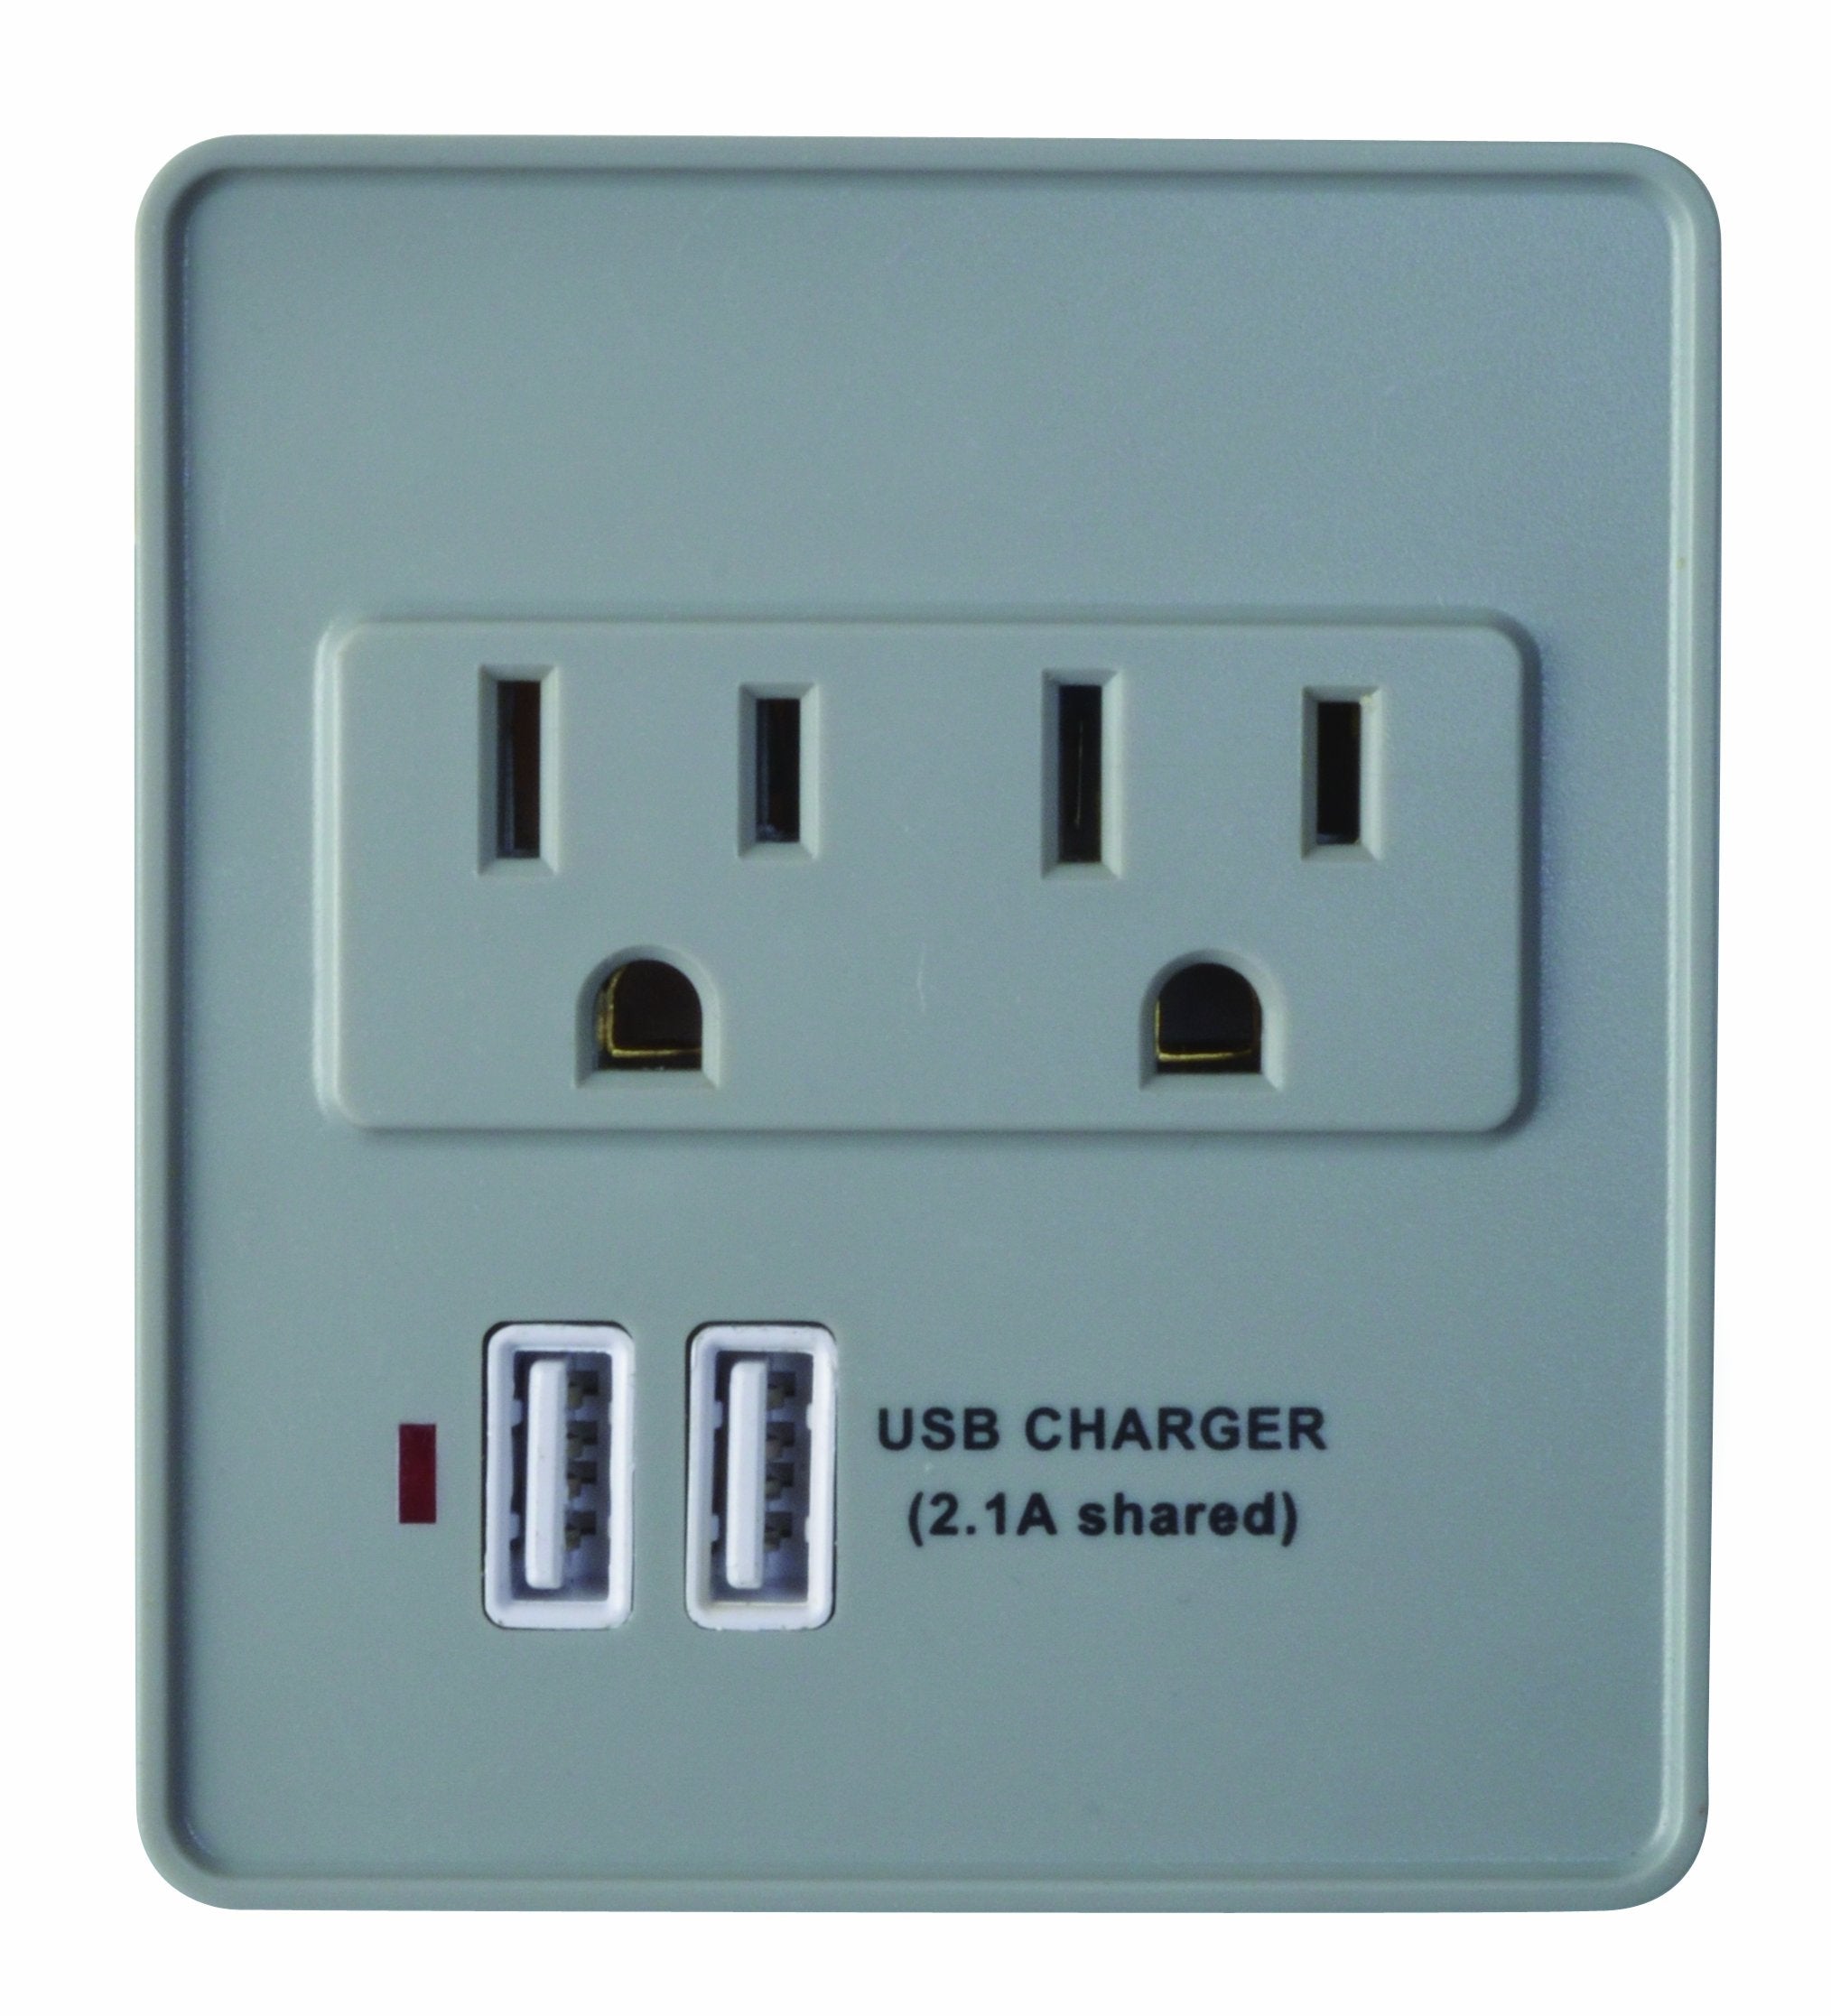 Woods 410517821 2 Outlet 2 USB Wall Tap Surge Protector